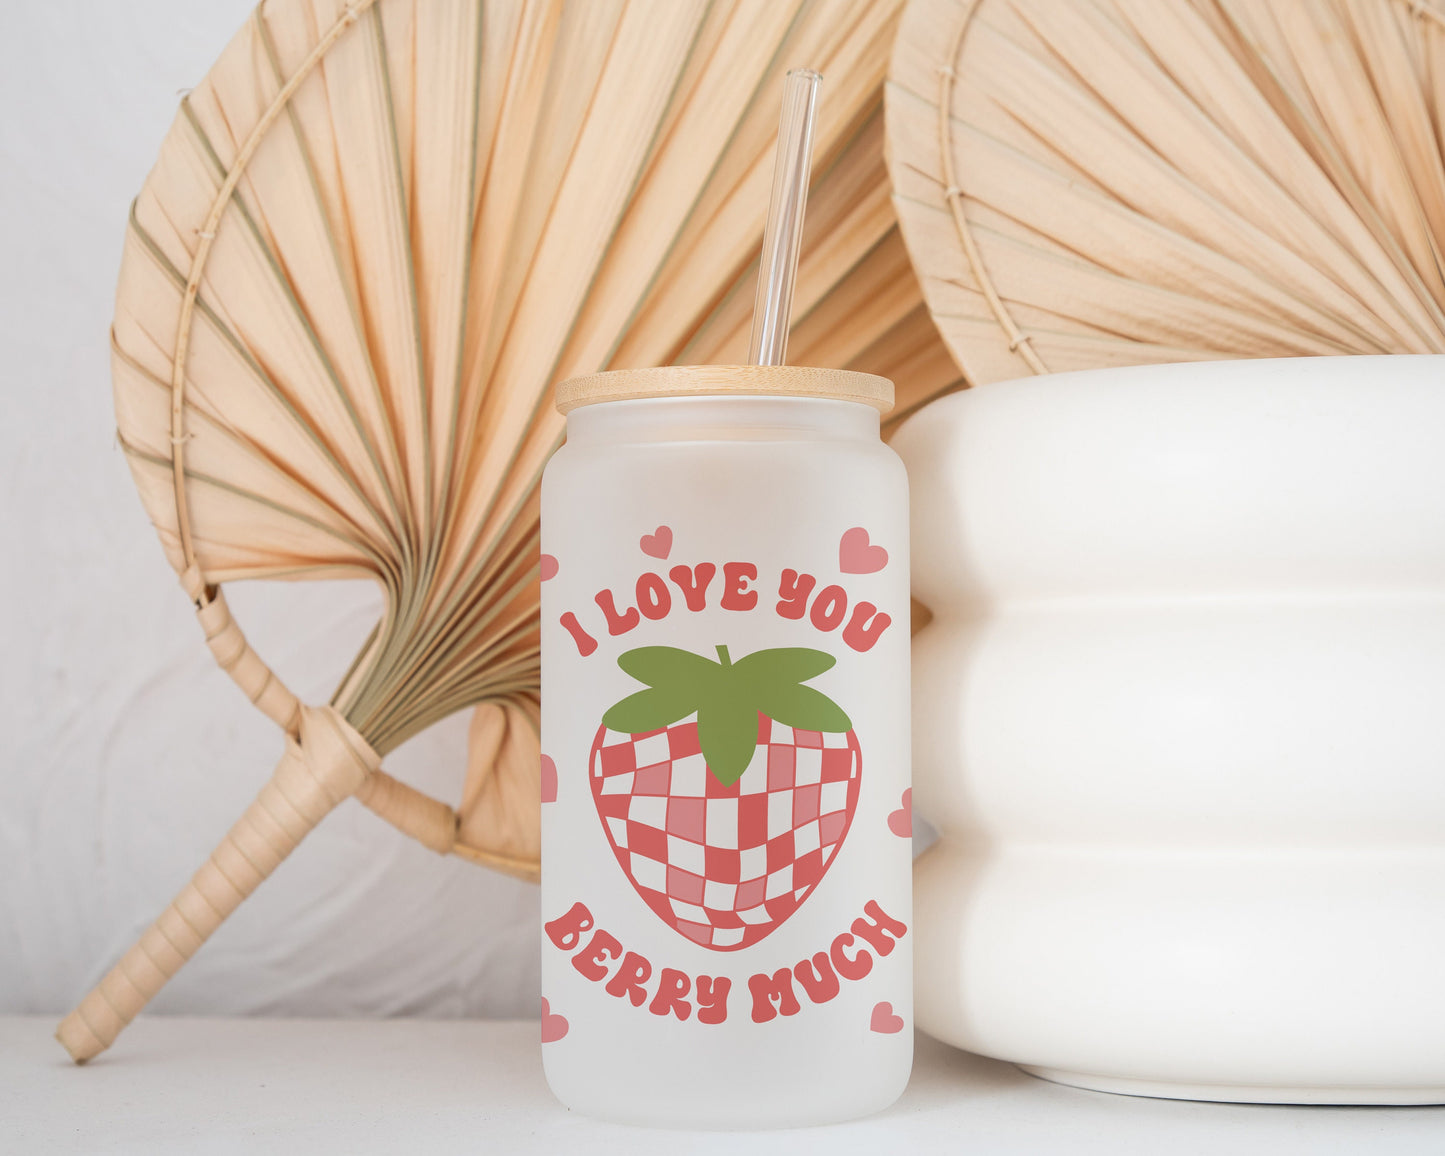 I Love You Berry Much Drinking Glass - 16 oz. Glass